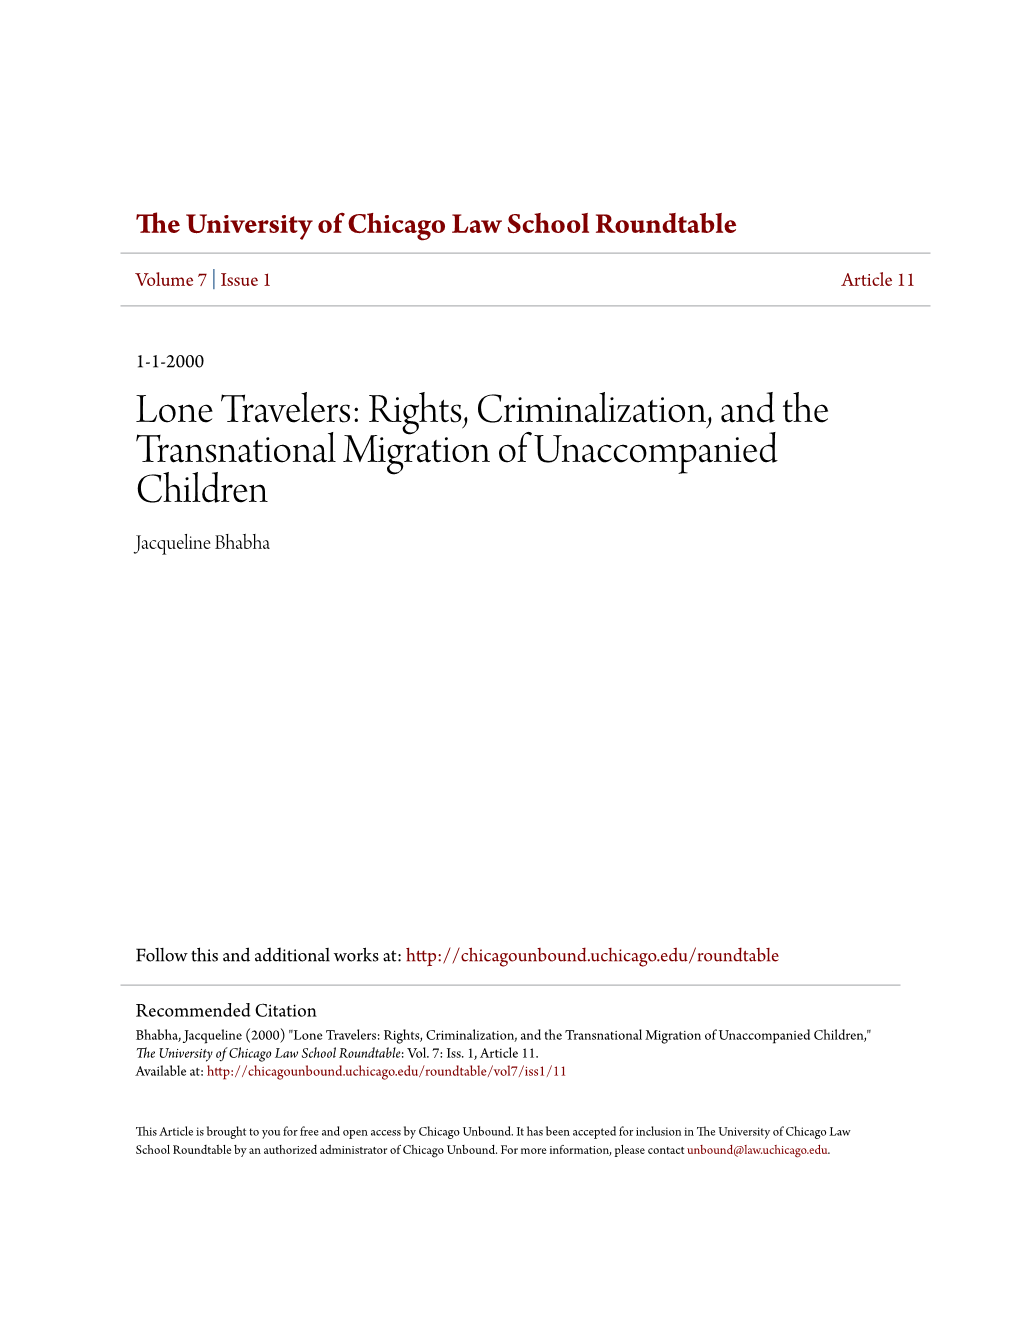 Rights, Criminalization, and the Transnational Migration of Unaccompanied Children Jacqueline Bhabha